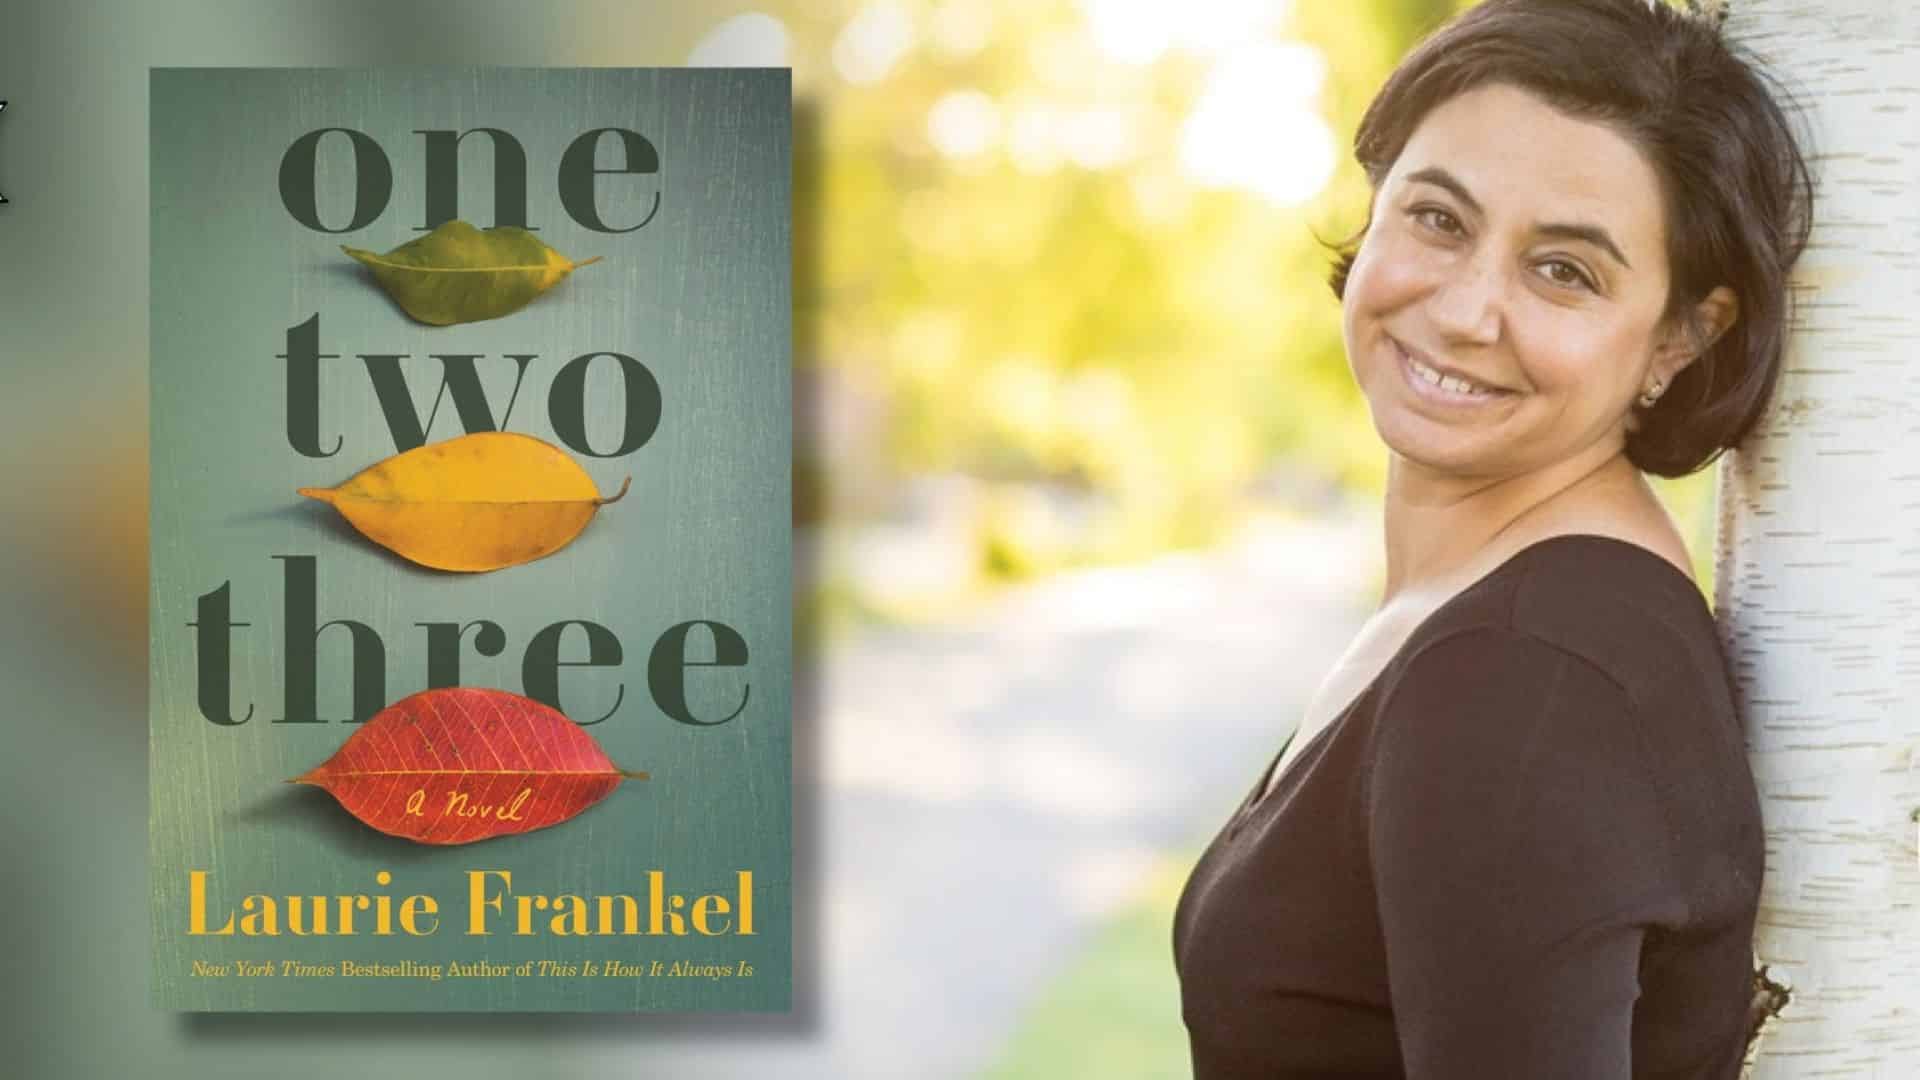 An Exclusive Interview With Laurie Frankel Author of One Two Three